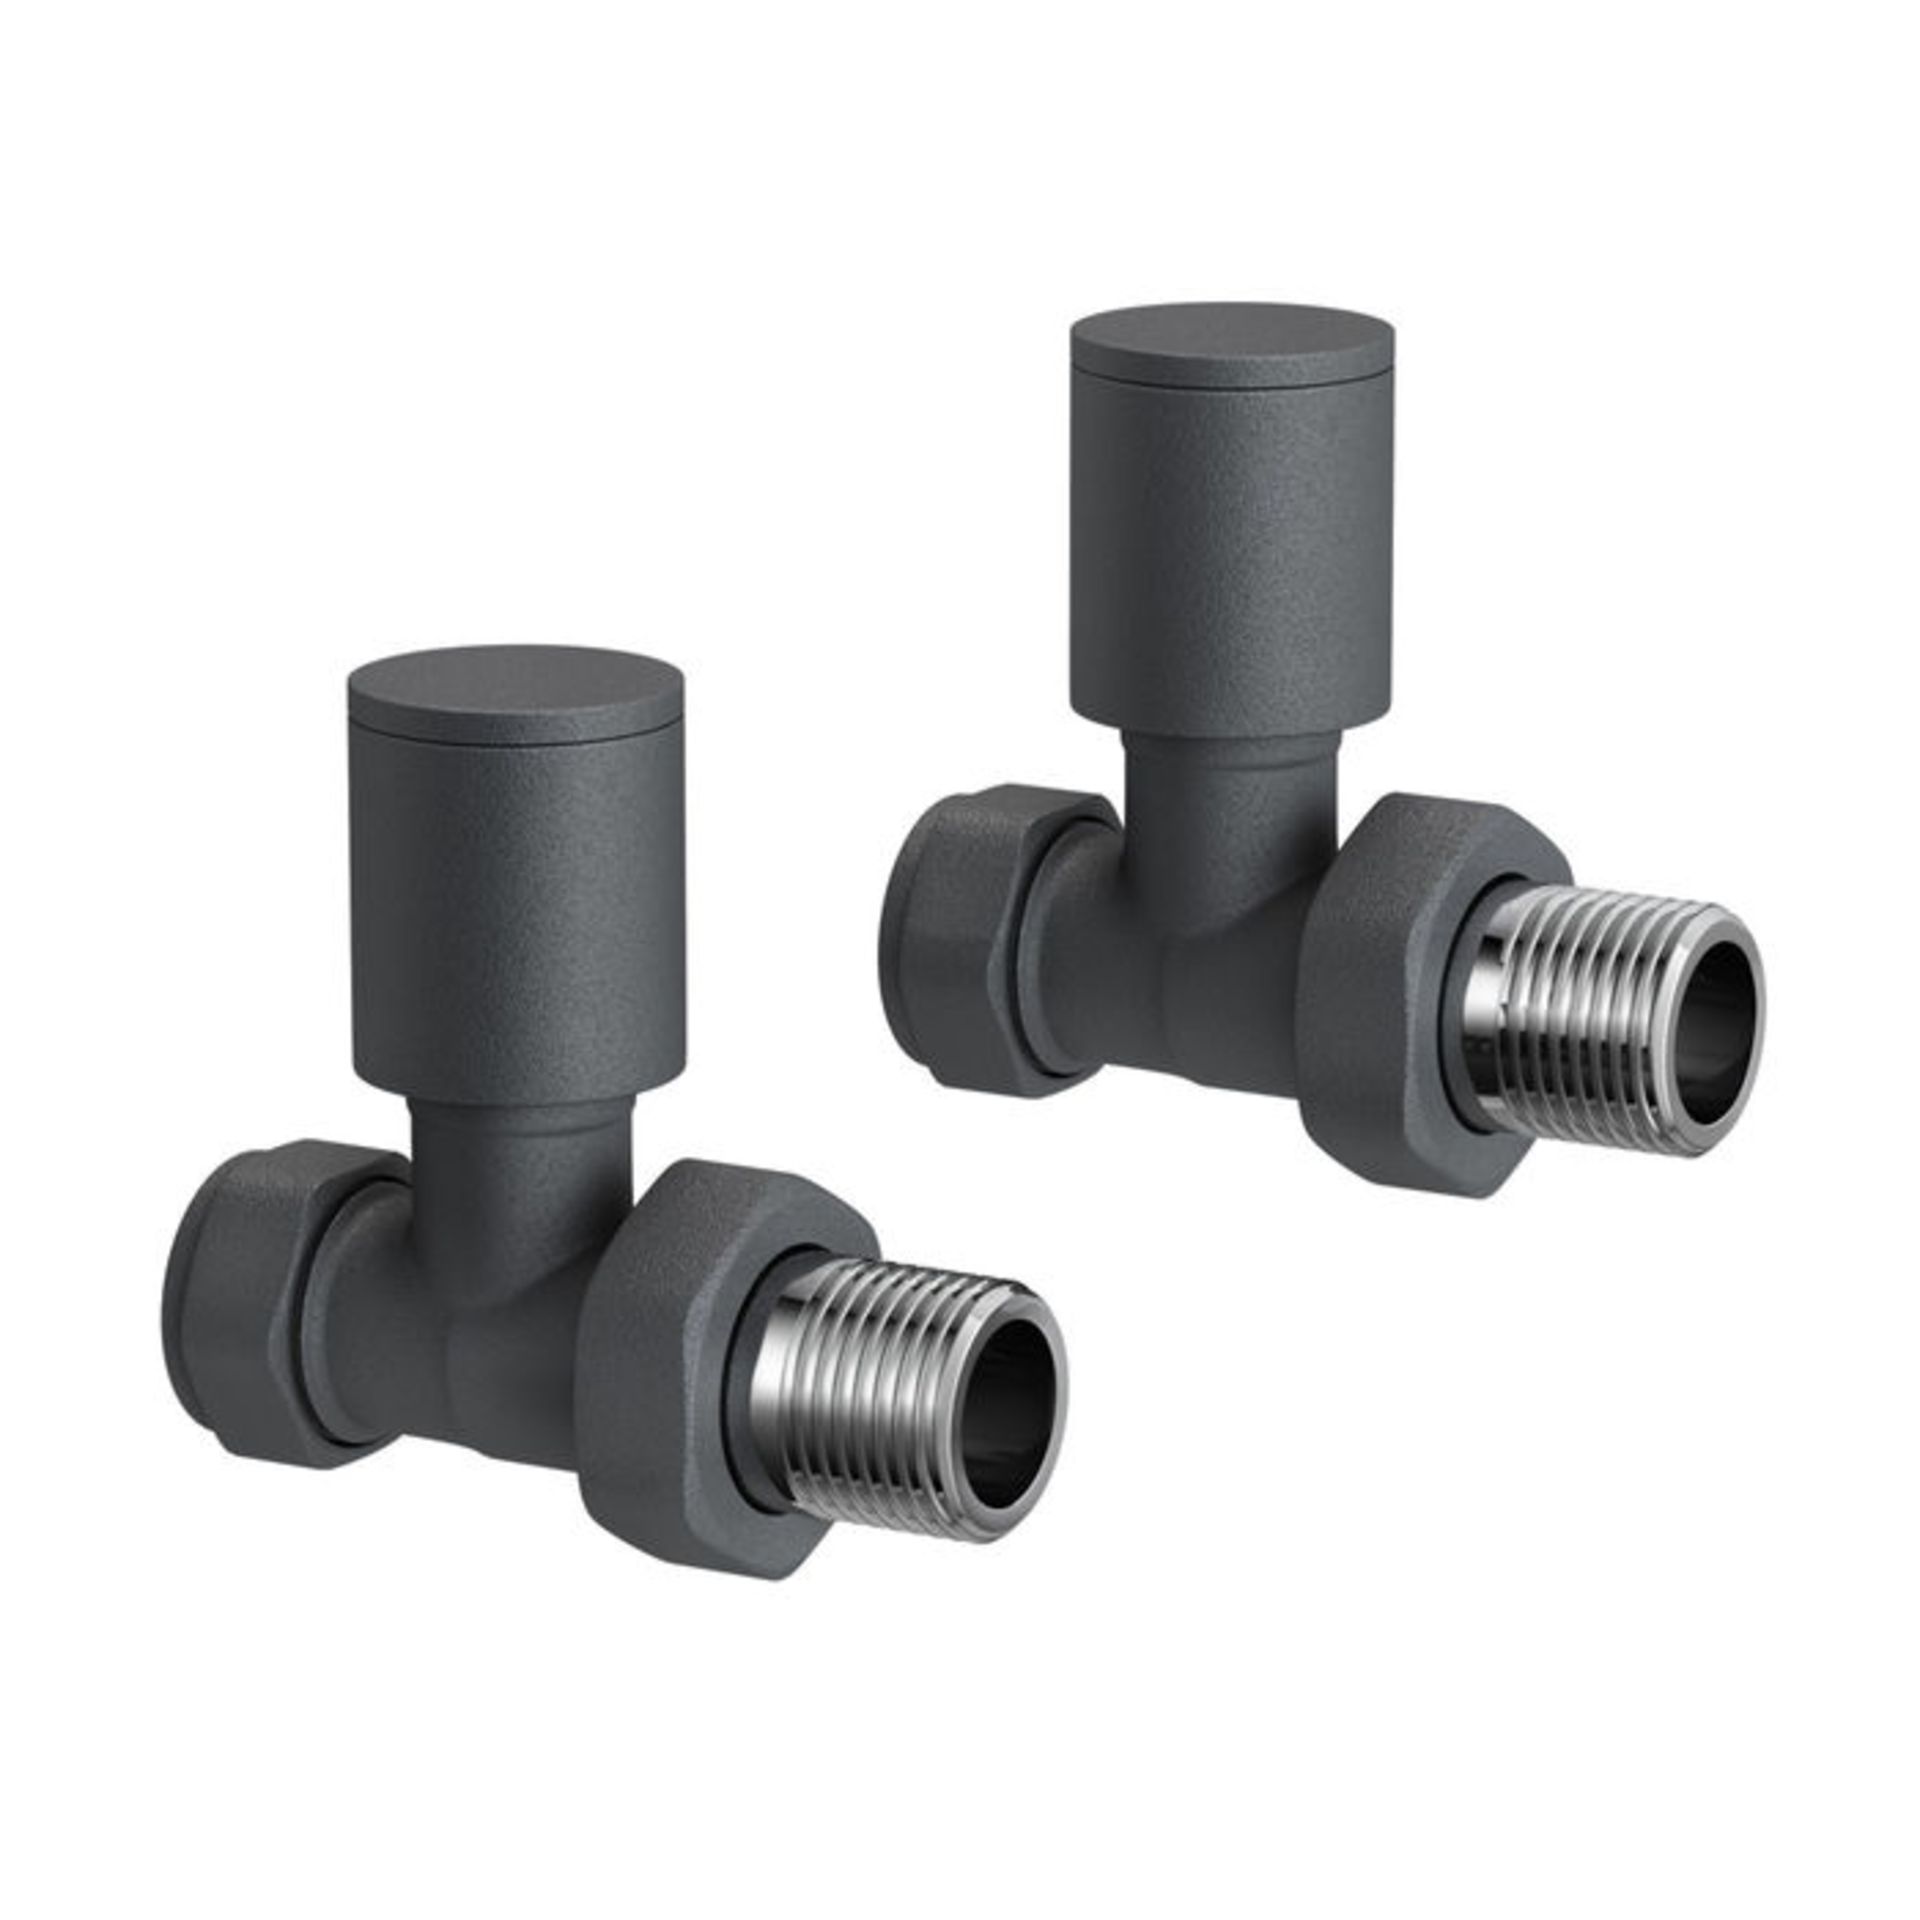 (P48) Anthracite Standard Connection Straight Radiator Valves 15mm Contemporary anthracite finish